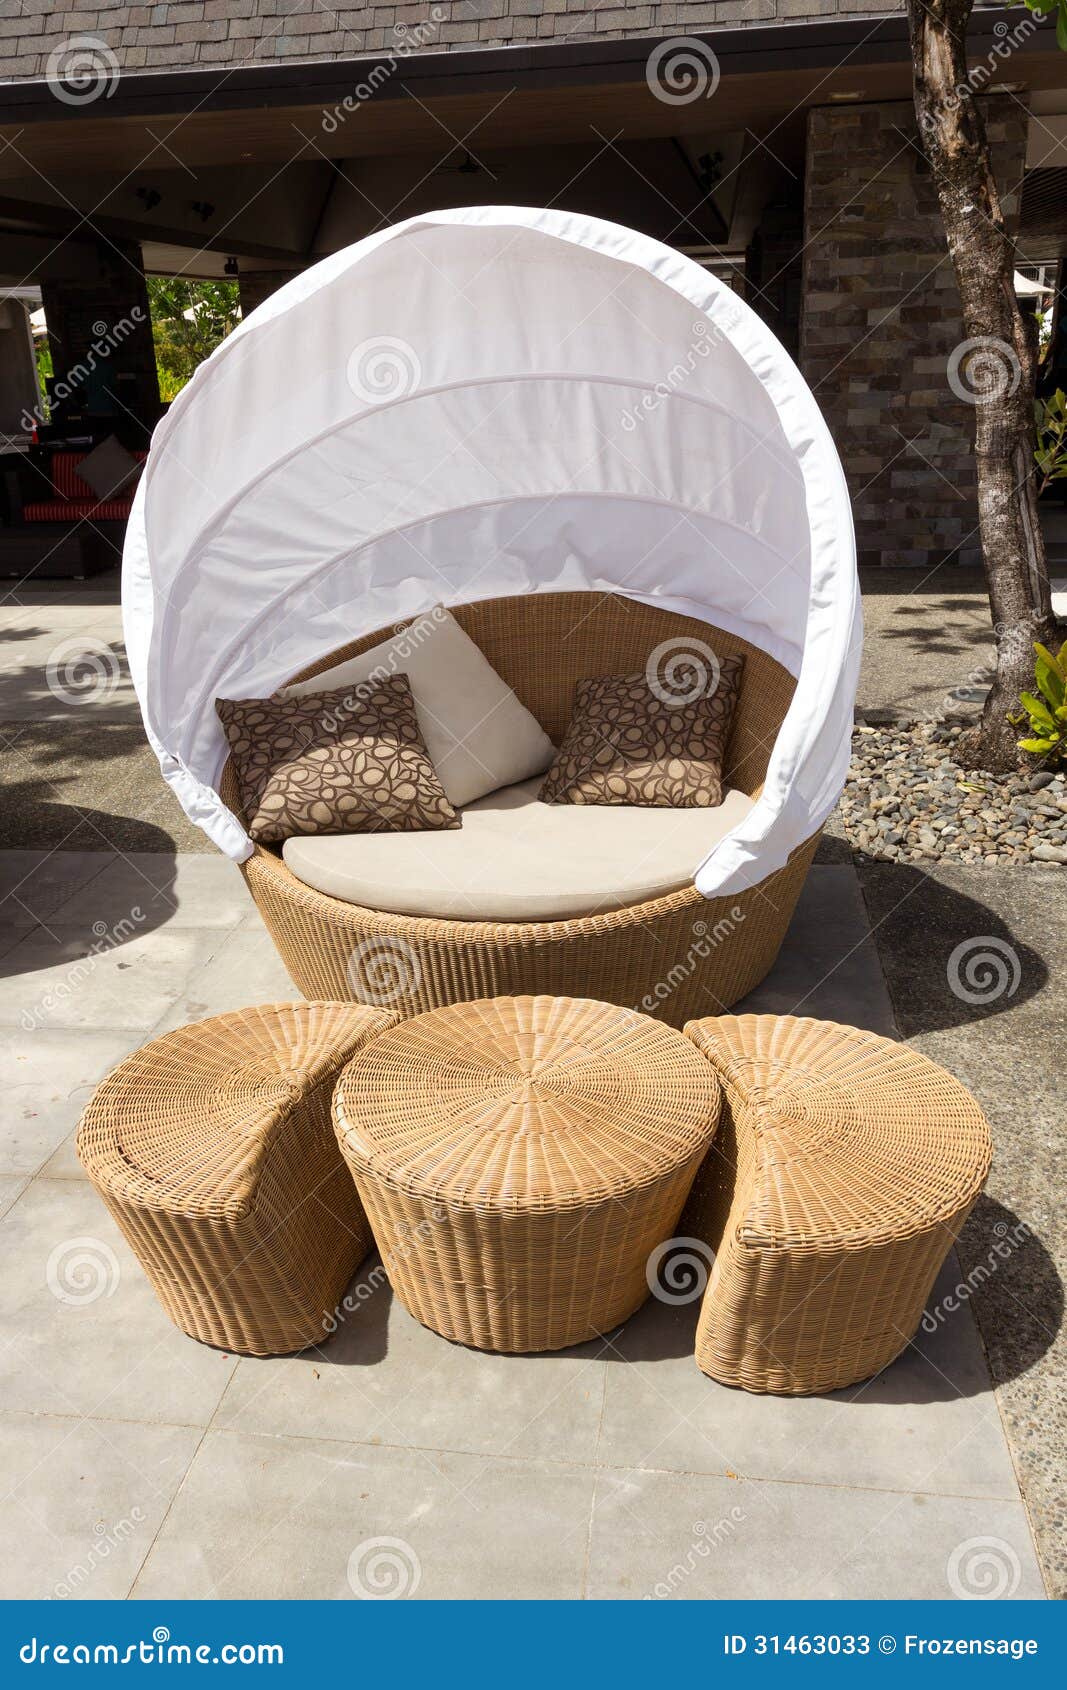 Outdoor Sofa Chair With Cover Stock Photos - Image: 31463033